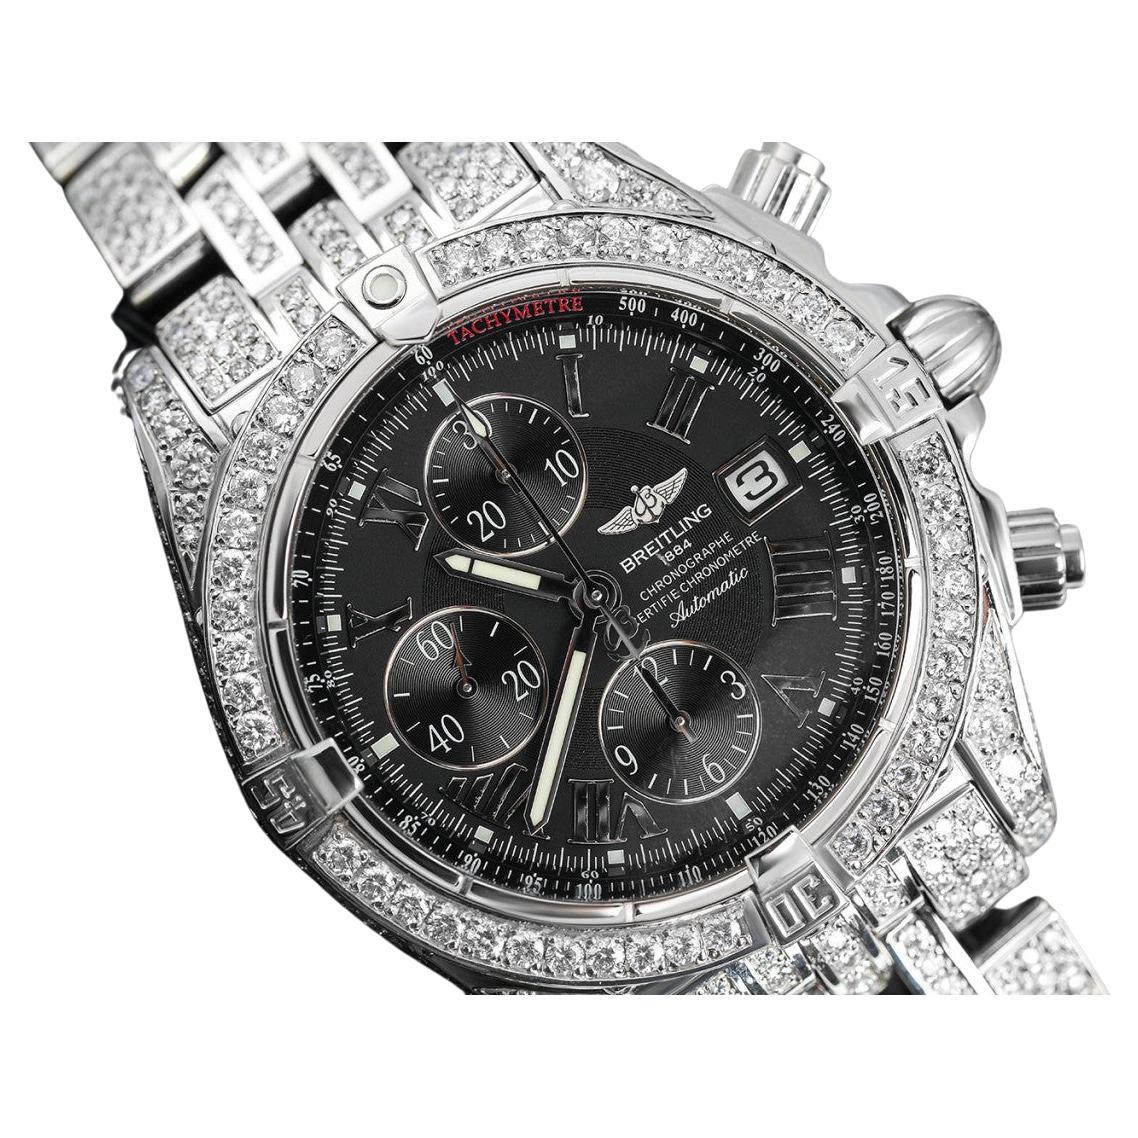 What is so special about a Breitling watch?